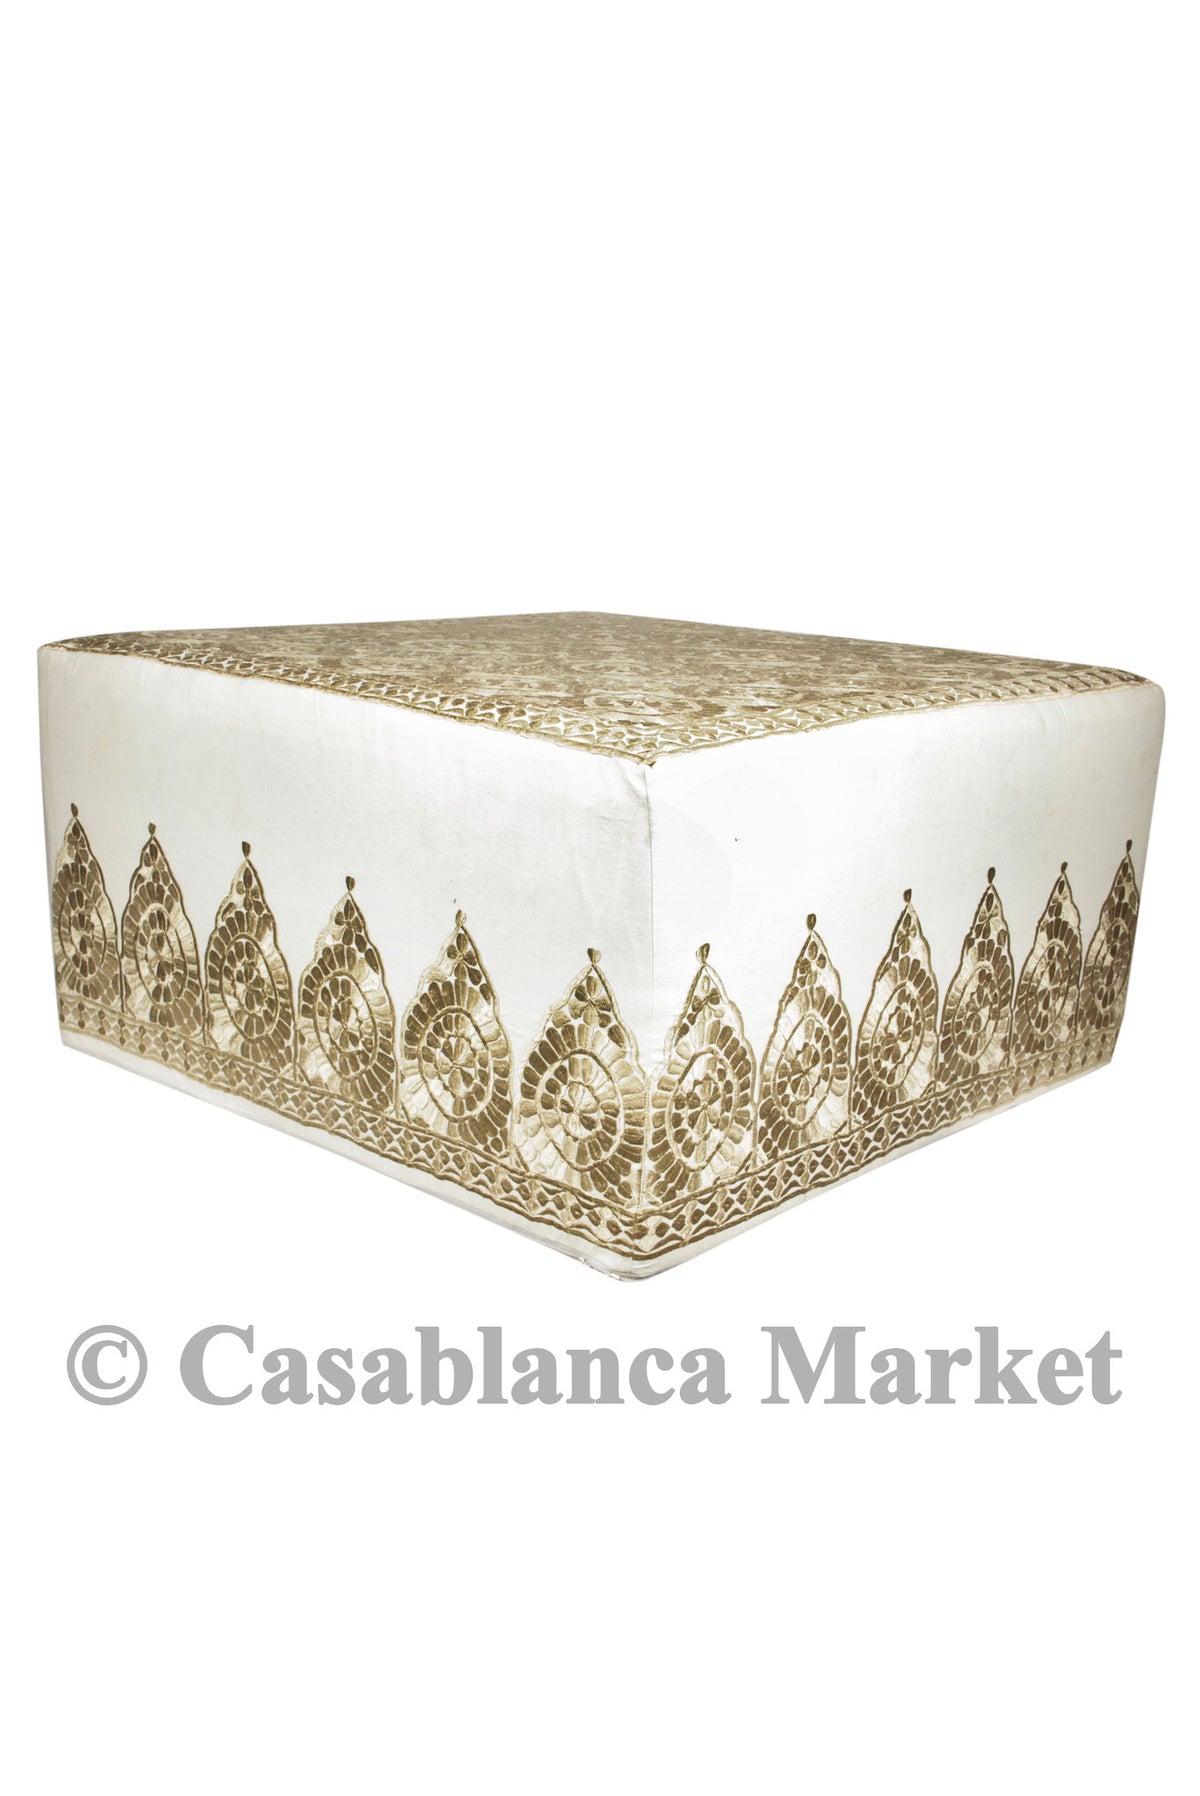 Fez Embroidered Ottoman, Beige/Ivory